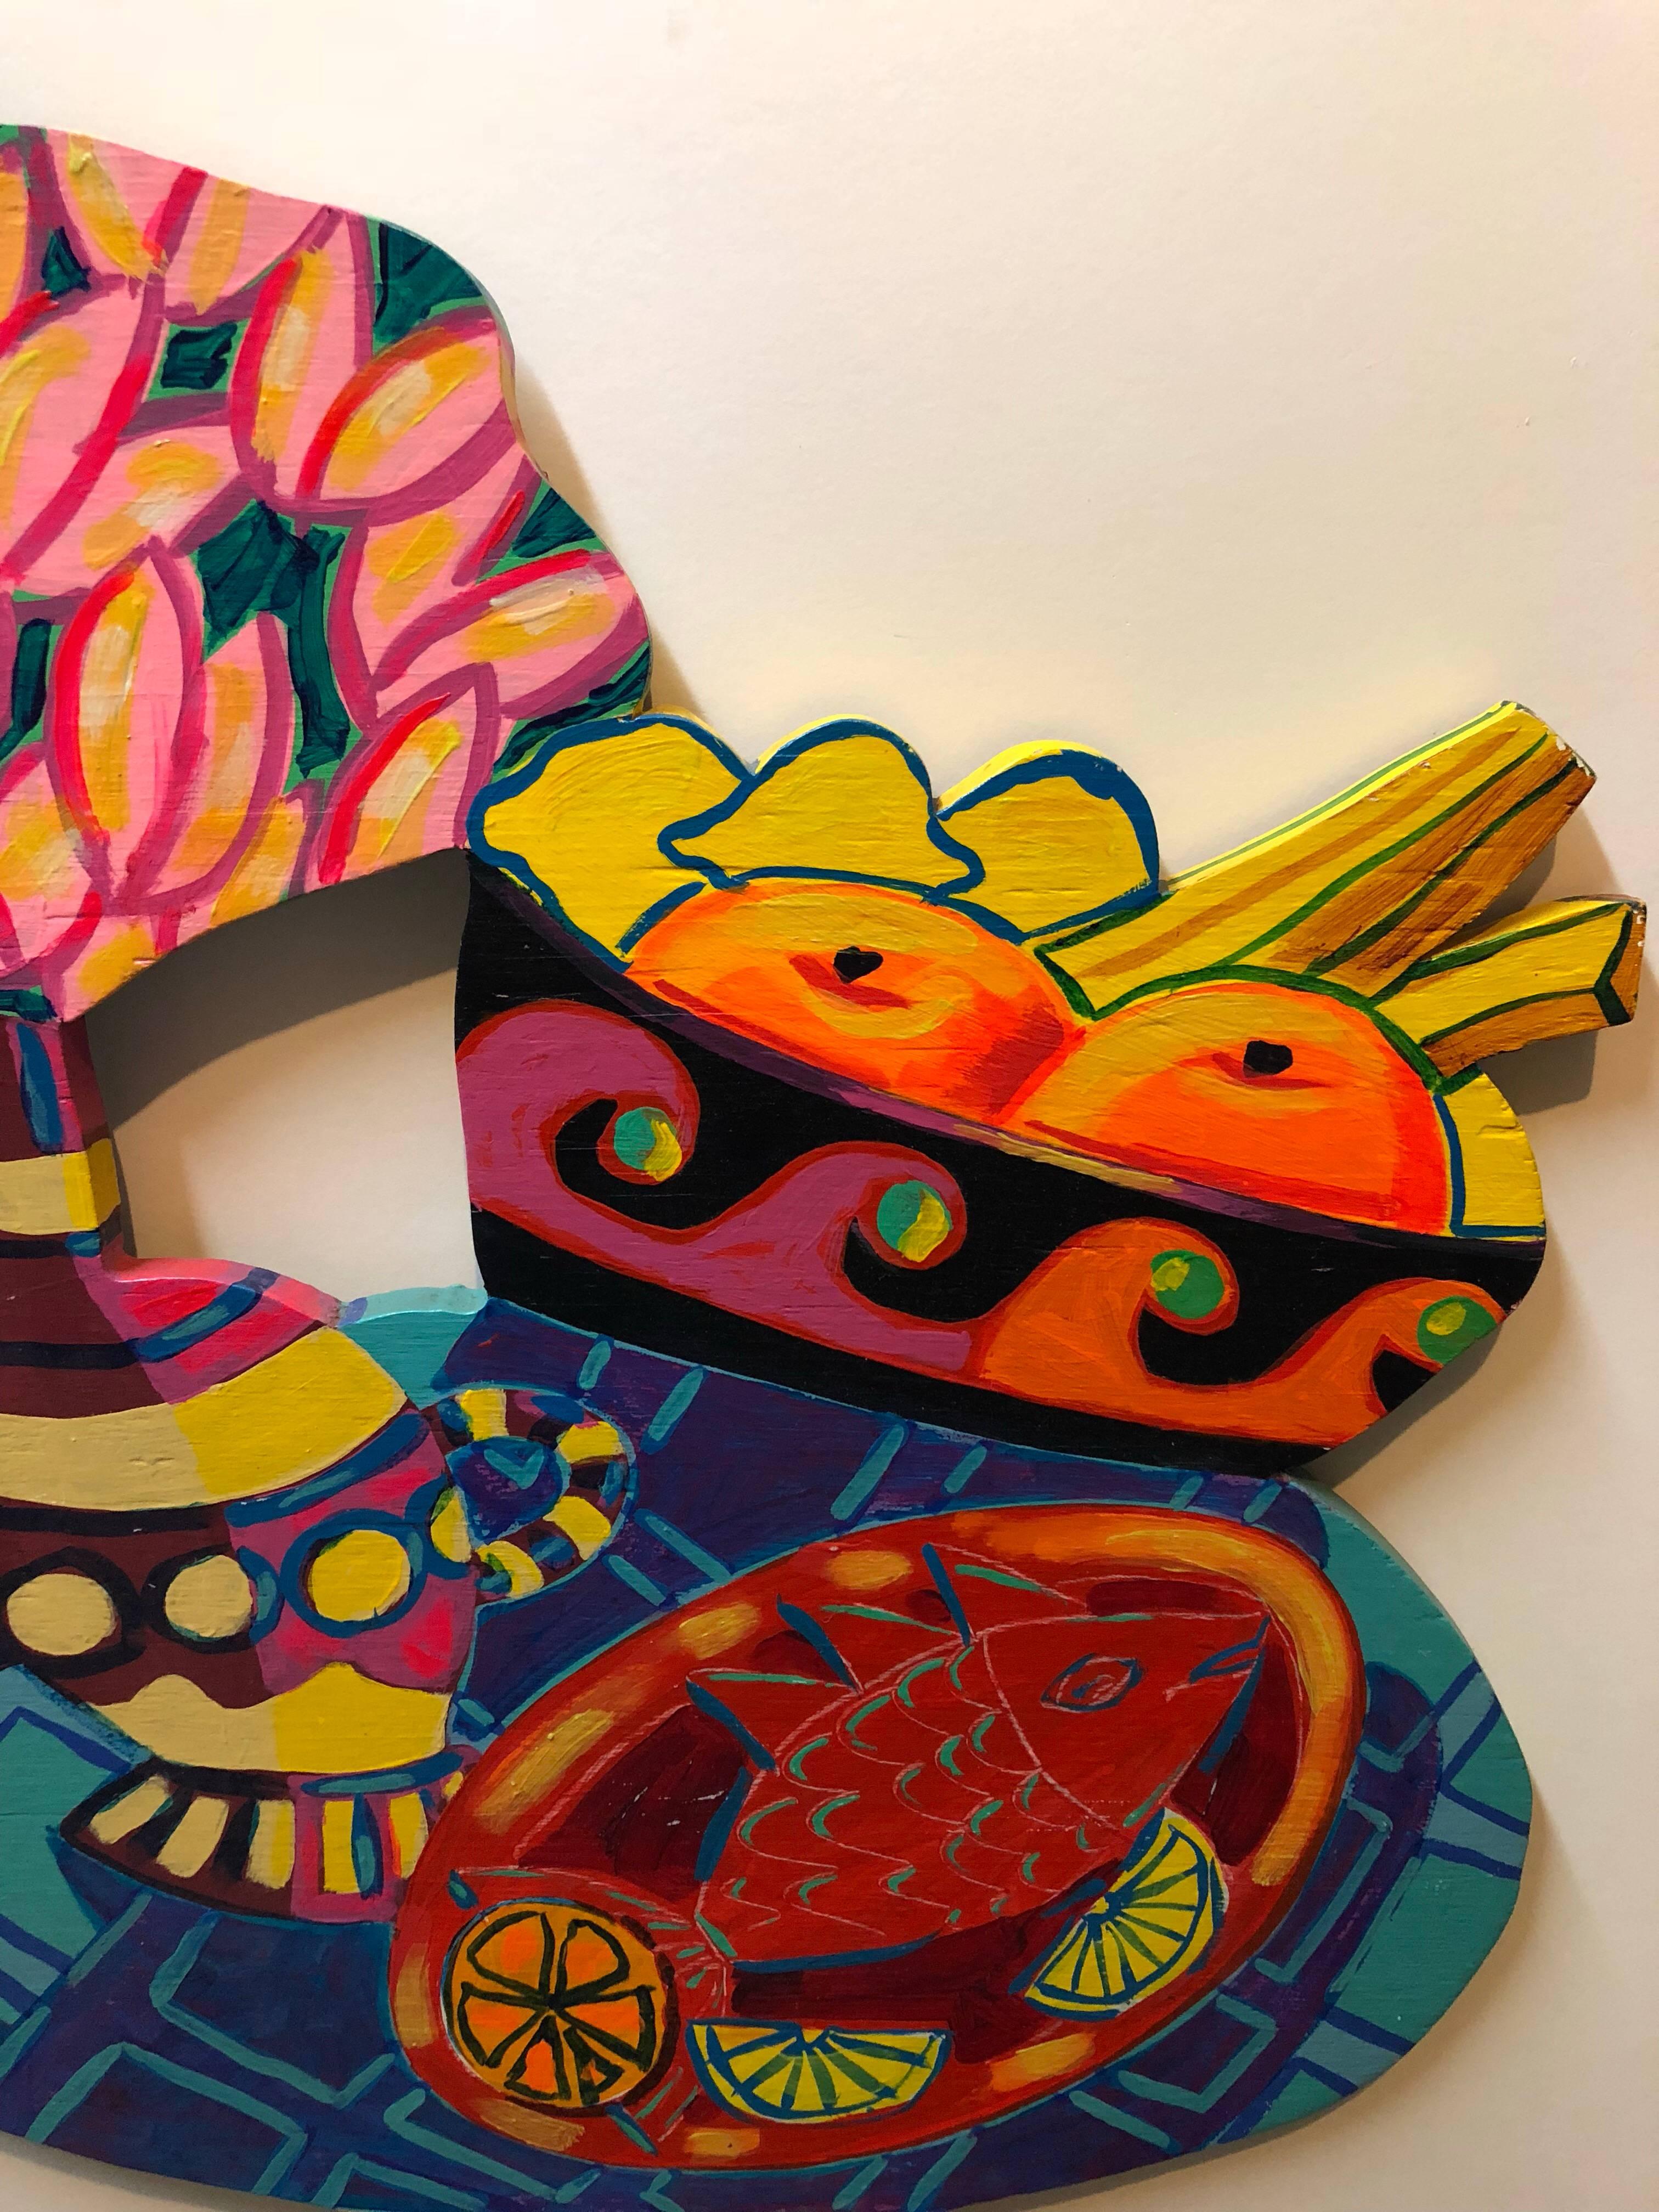 This is a colorful wall hanging sculpture by Irish Californian Pop Artist Amanda Watt
A self-confessed ‘Fusionist’, Amanda pays homage to the past: the multiple perspectives of cubism; the bright energy of expressionism and the simplicity of